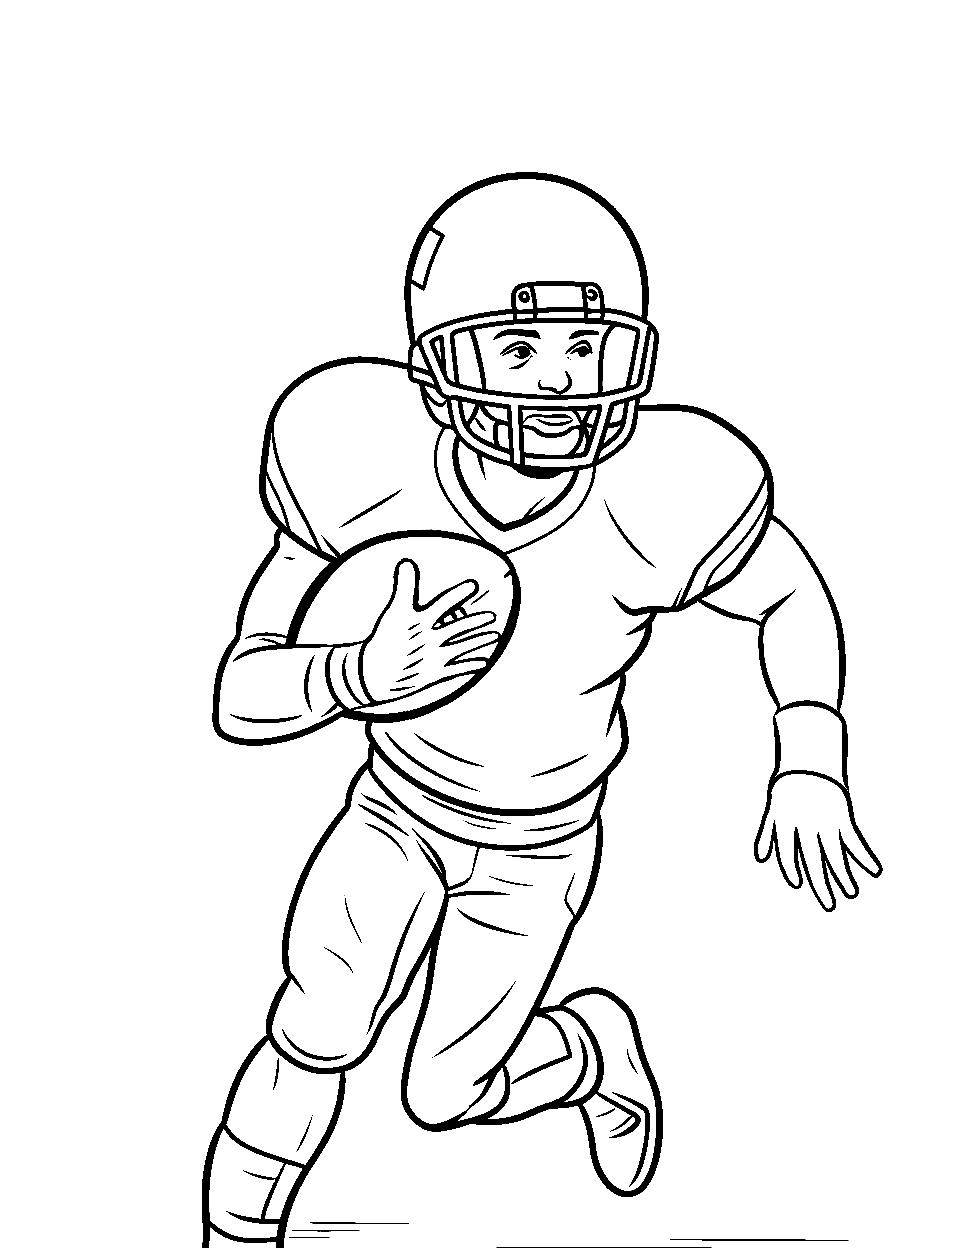 Dynamic Punt Return Coloring Page - A player running with the ball during a punt return.